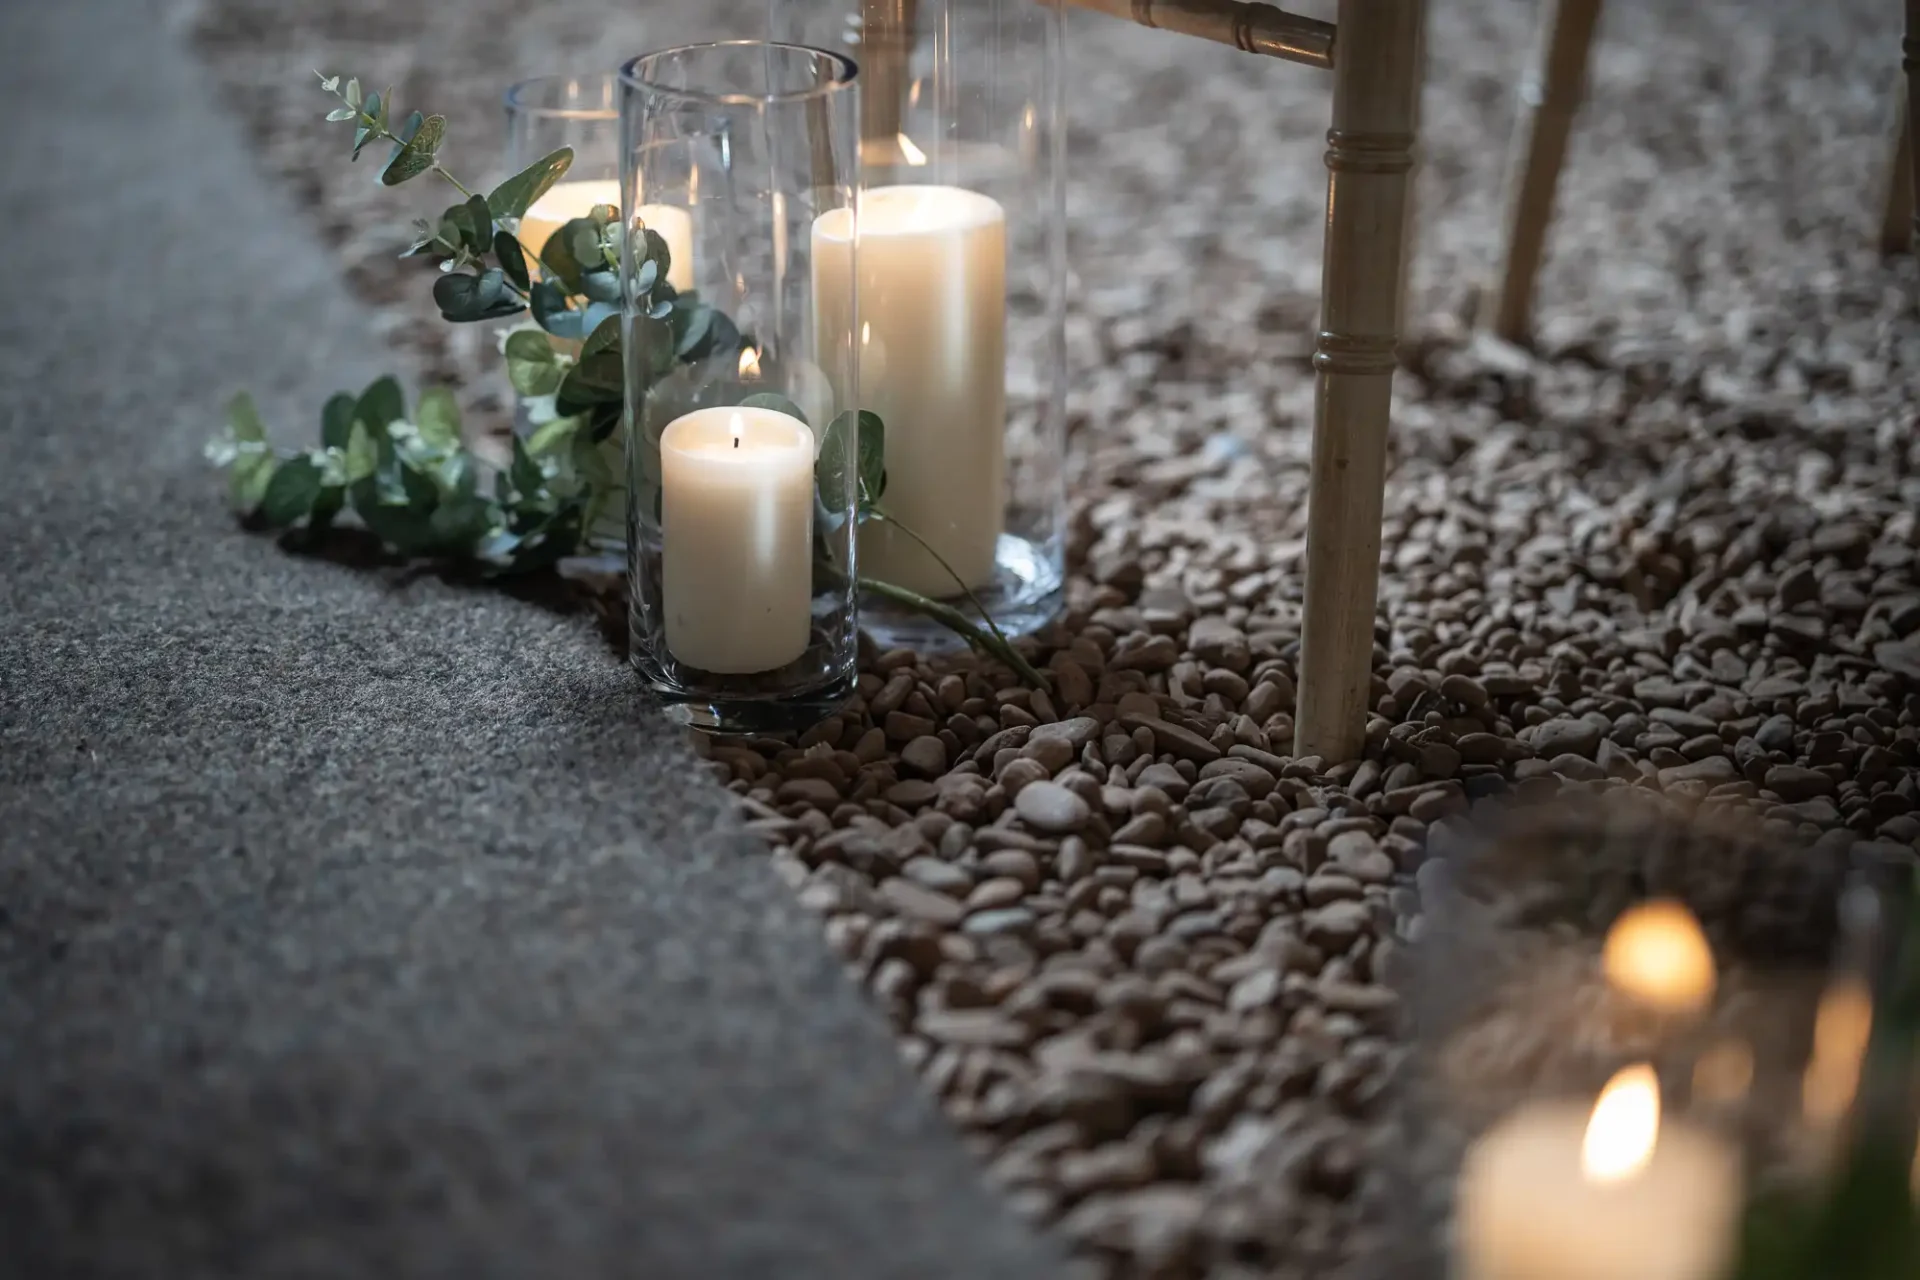 Candles in glass holders and green garlands arranged on a pebble-strewn carpet, creating a serene ambiance.